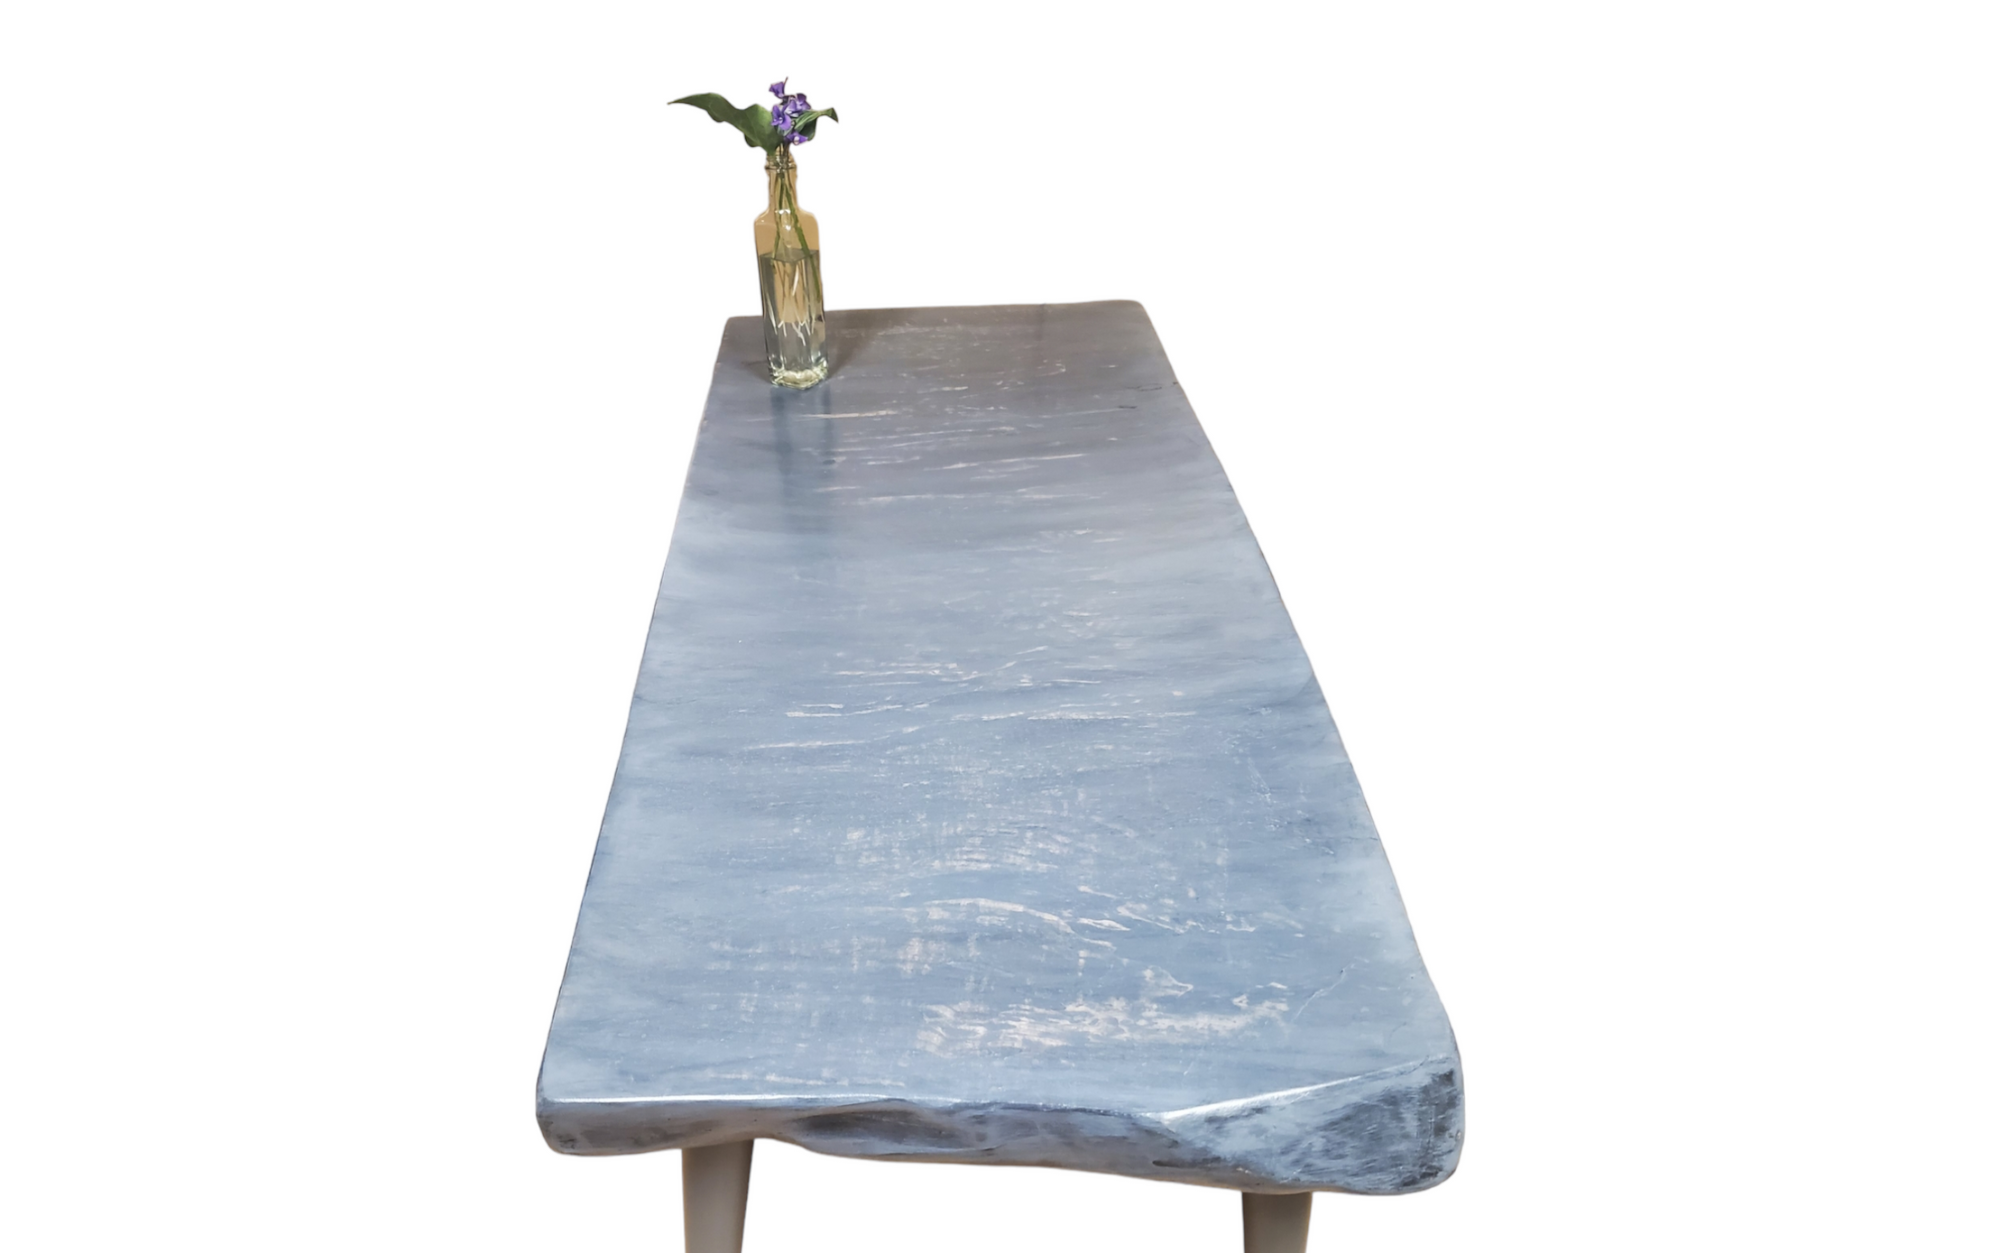 Gray Coffee Table- Long and Narrow- Live Edge Table- Marble Look- Concrete Look- Artistic Table- Unique Furniture- Solid Hardwood- Signed